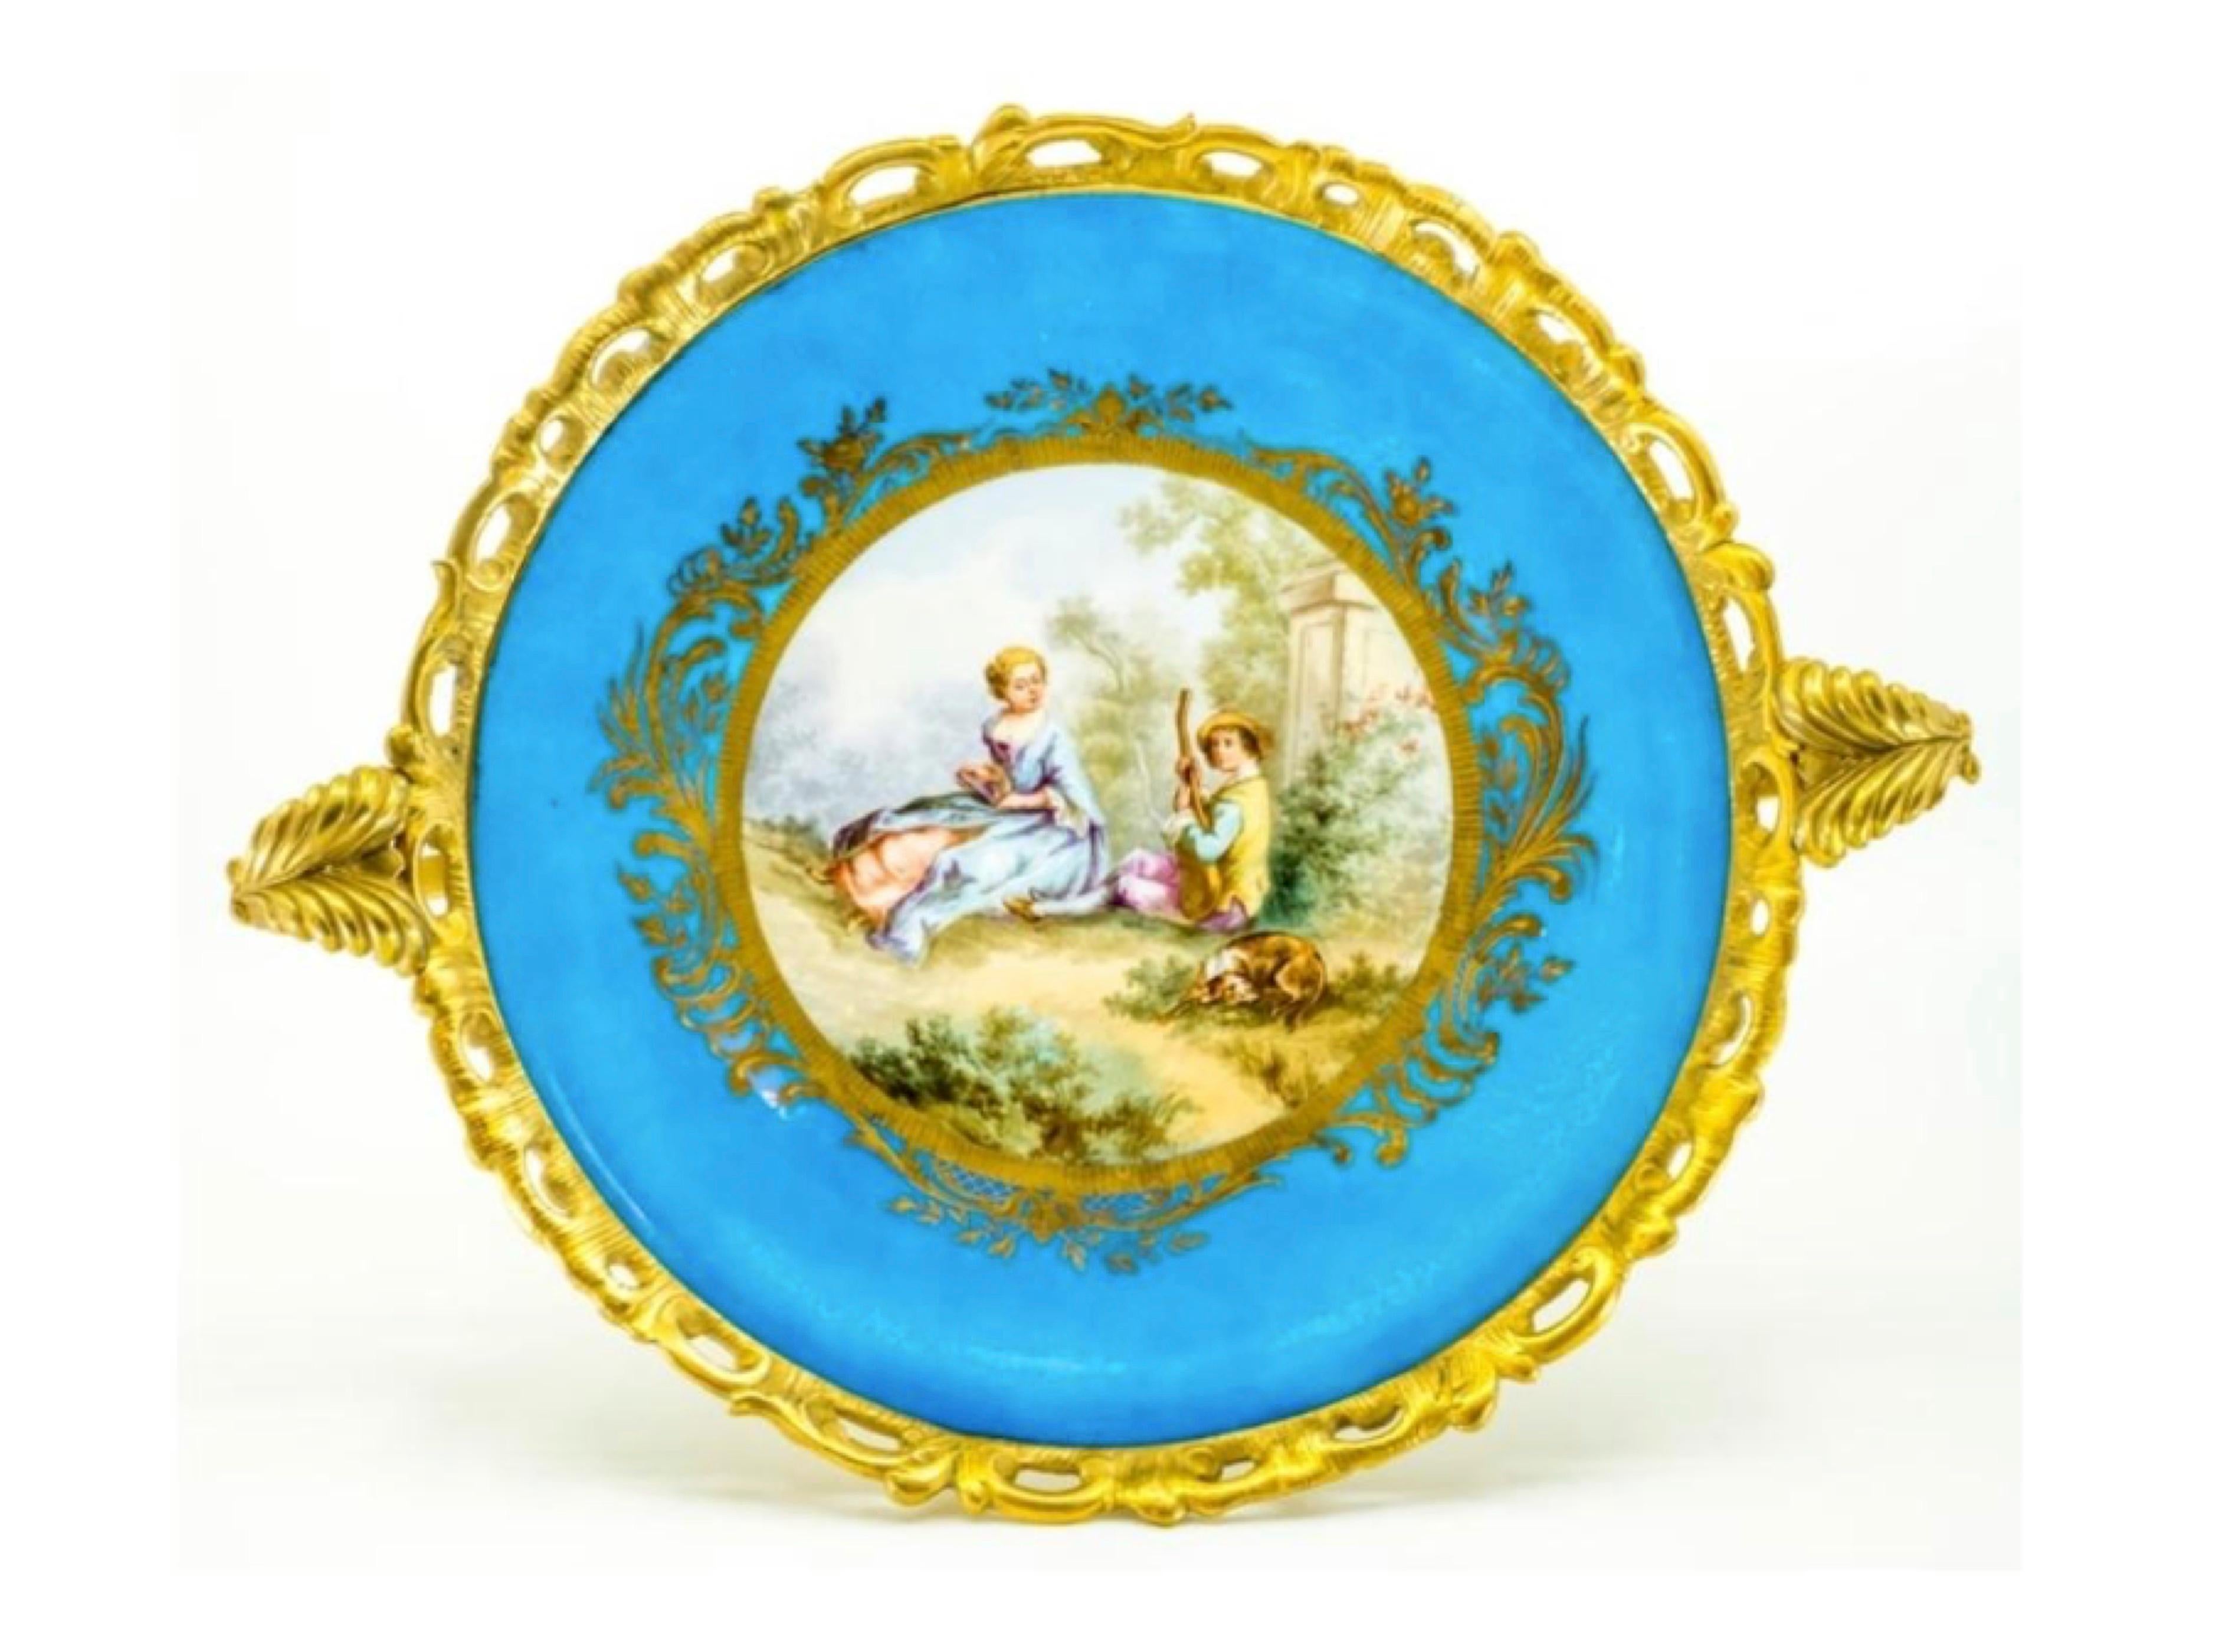 This French Sèvres-style porcelain plate from the 19th century is set in a gilt bronze mount, ormolu that features a Rococo base, rim and two handles with stylized foliage and C-scrolls.
The center of the porcelain plate displays a pastoral scene